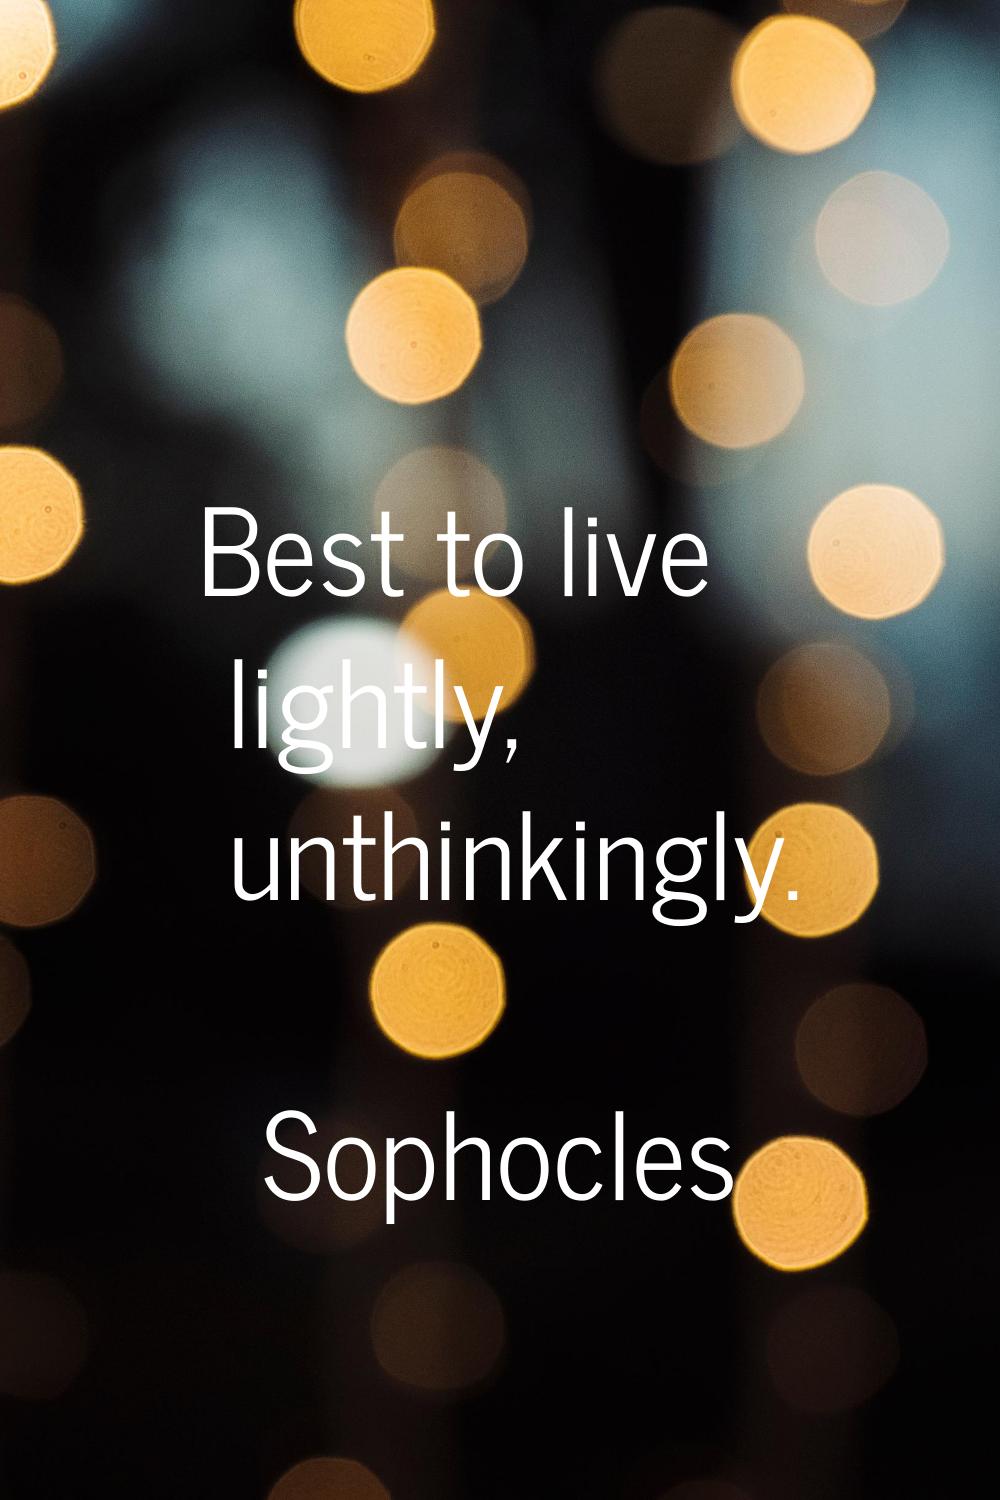 Best to live lightly, unthinkingly.